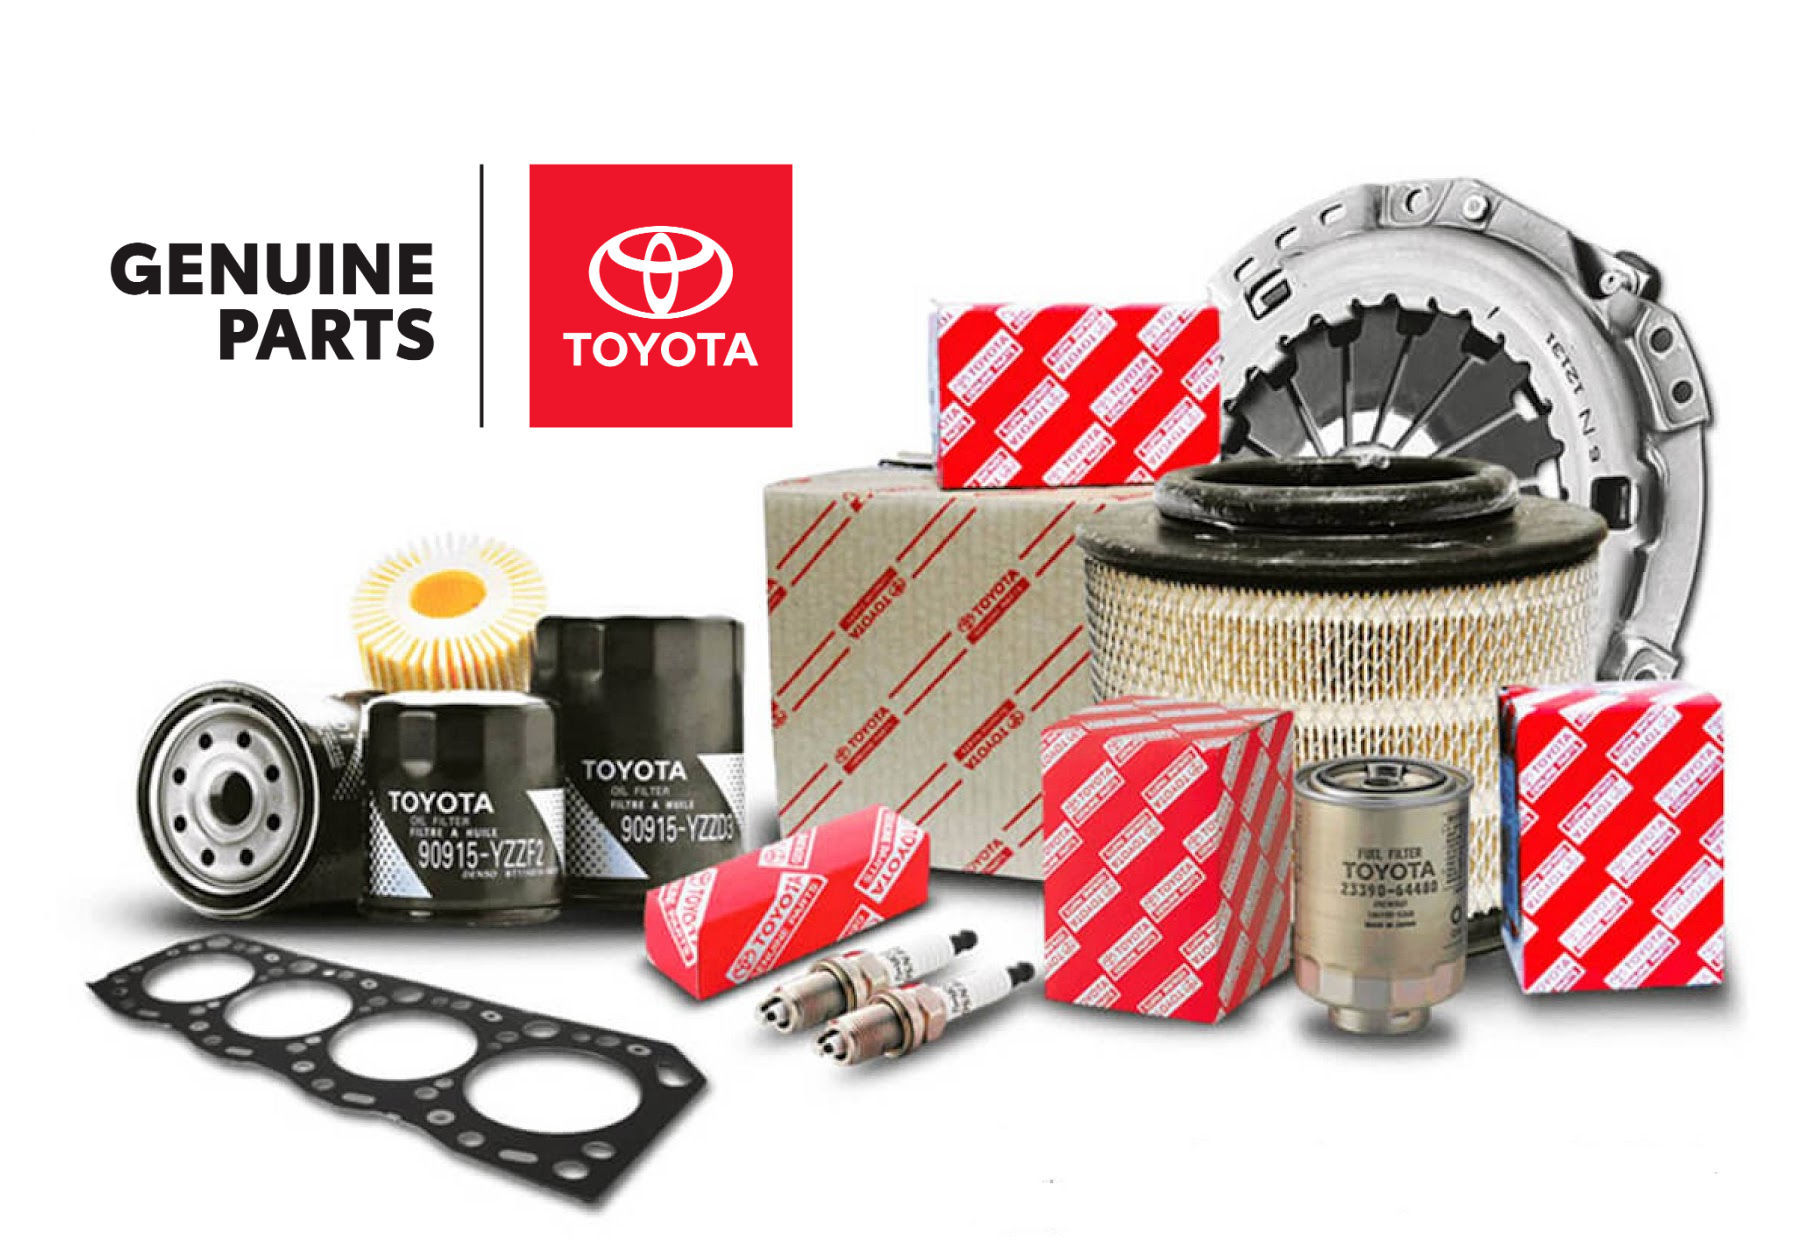 Toyota Original Accessories in Whitby